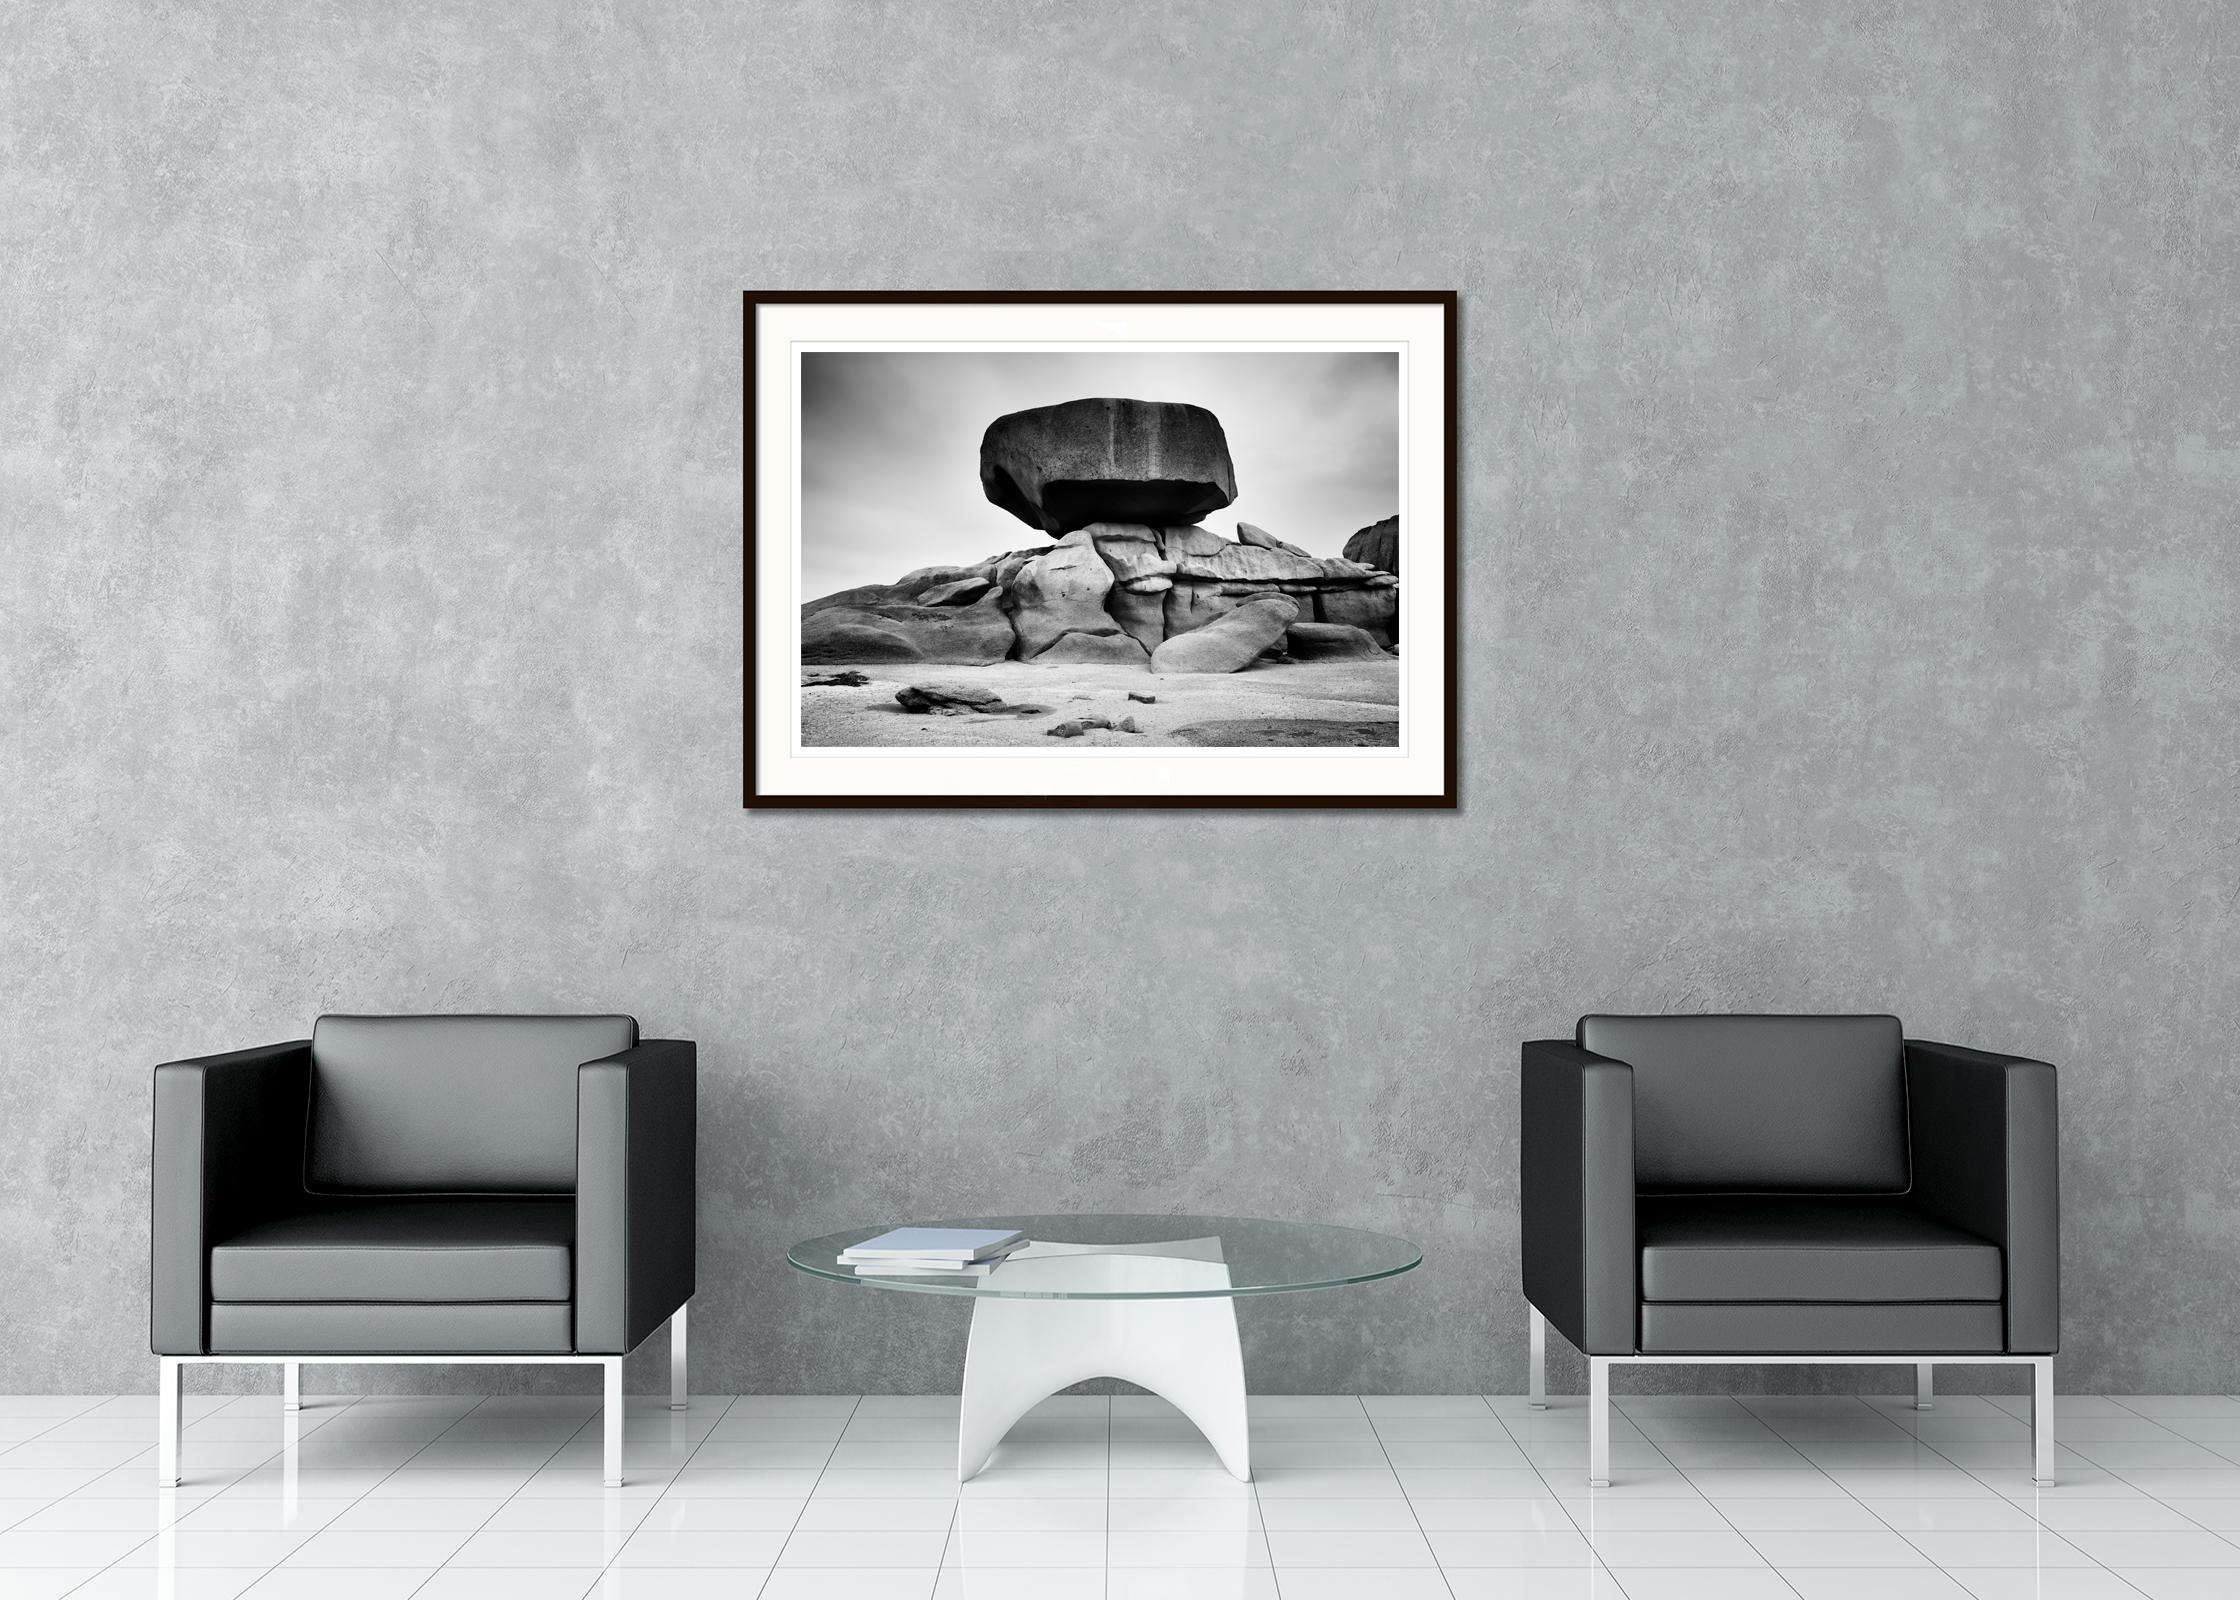 Black and white fine art panorama landscape photography print. Archival pigment ink print, edition of 8. Signed, titled, dated and numbered by artist. Certificate of authenticity included. Printed with 4cm white border. International award winner